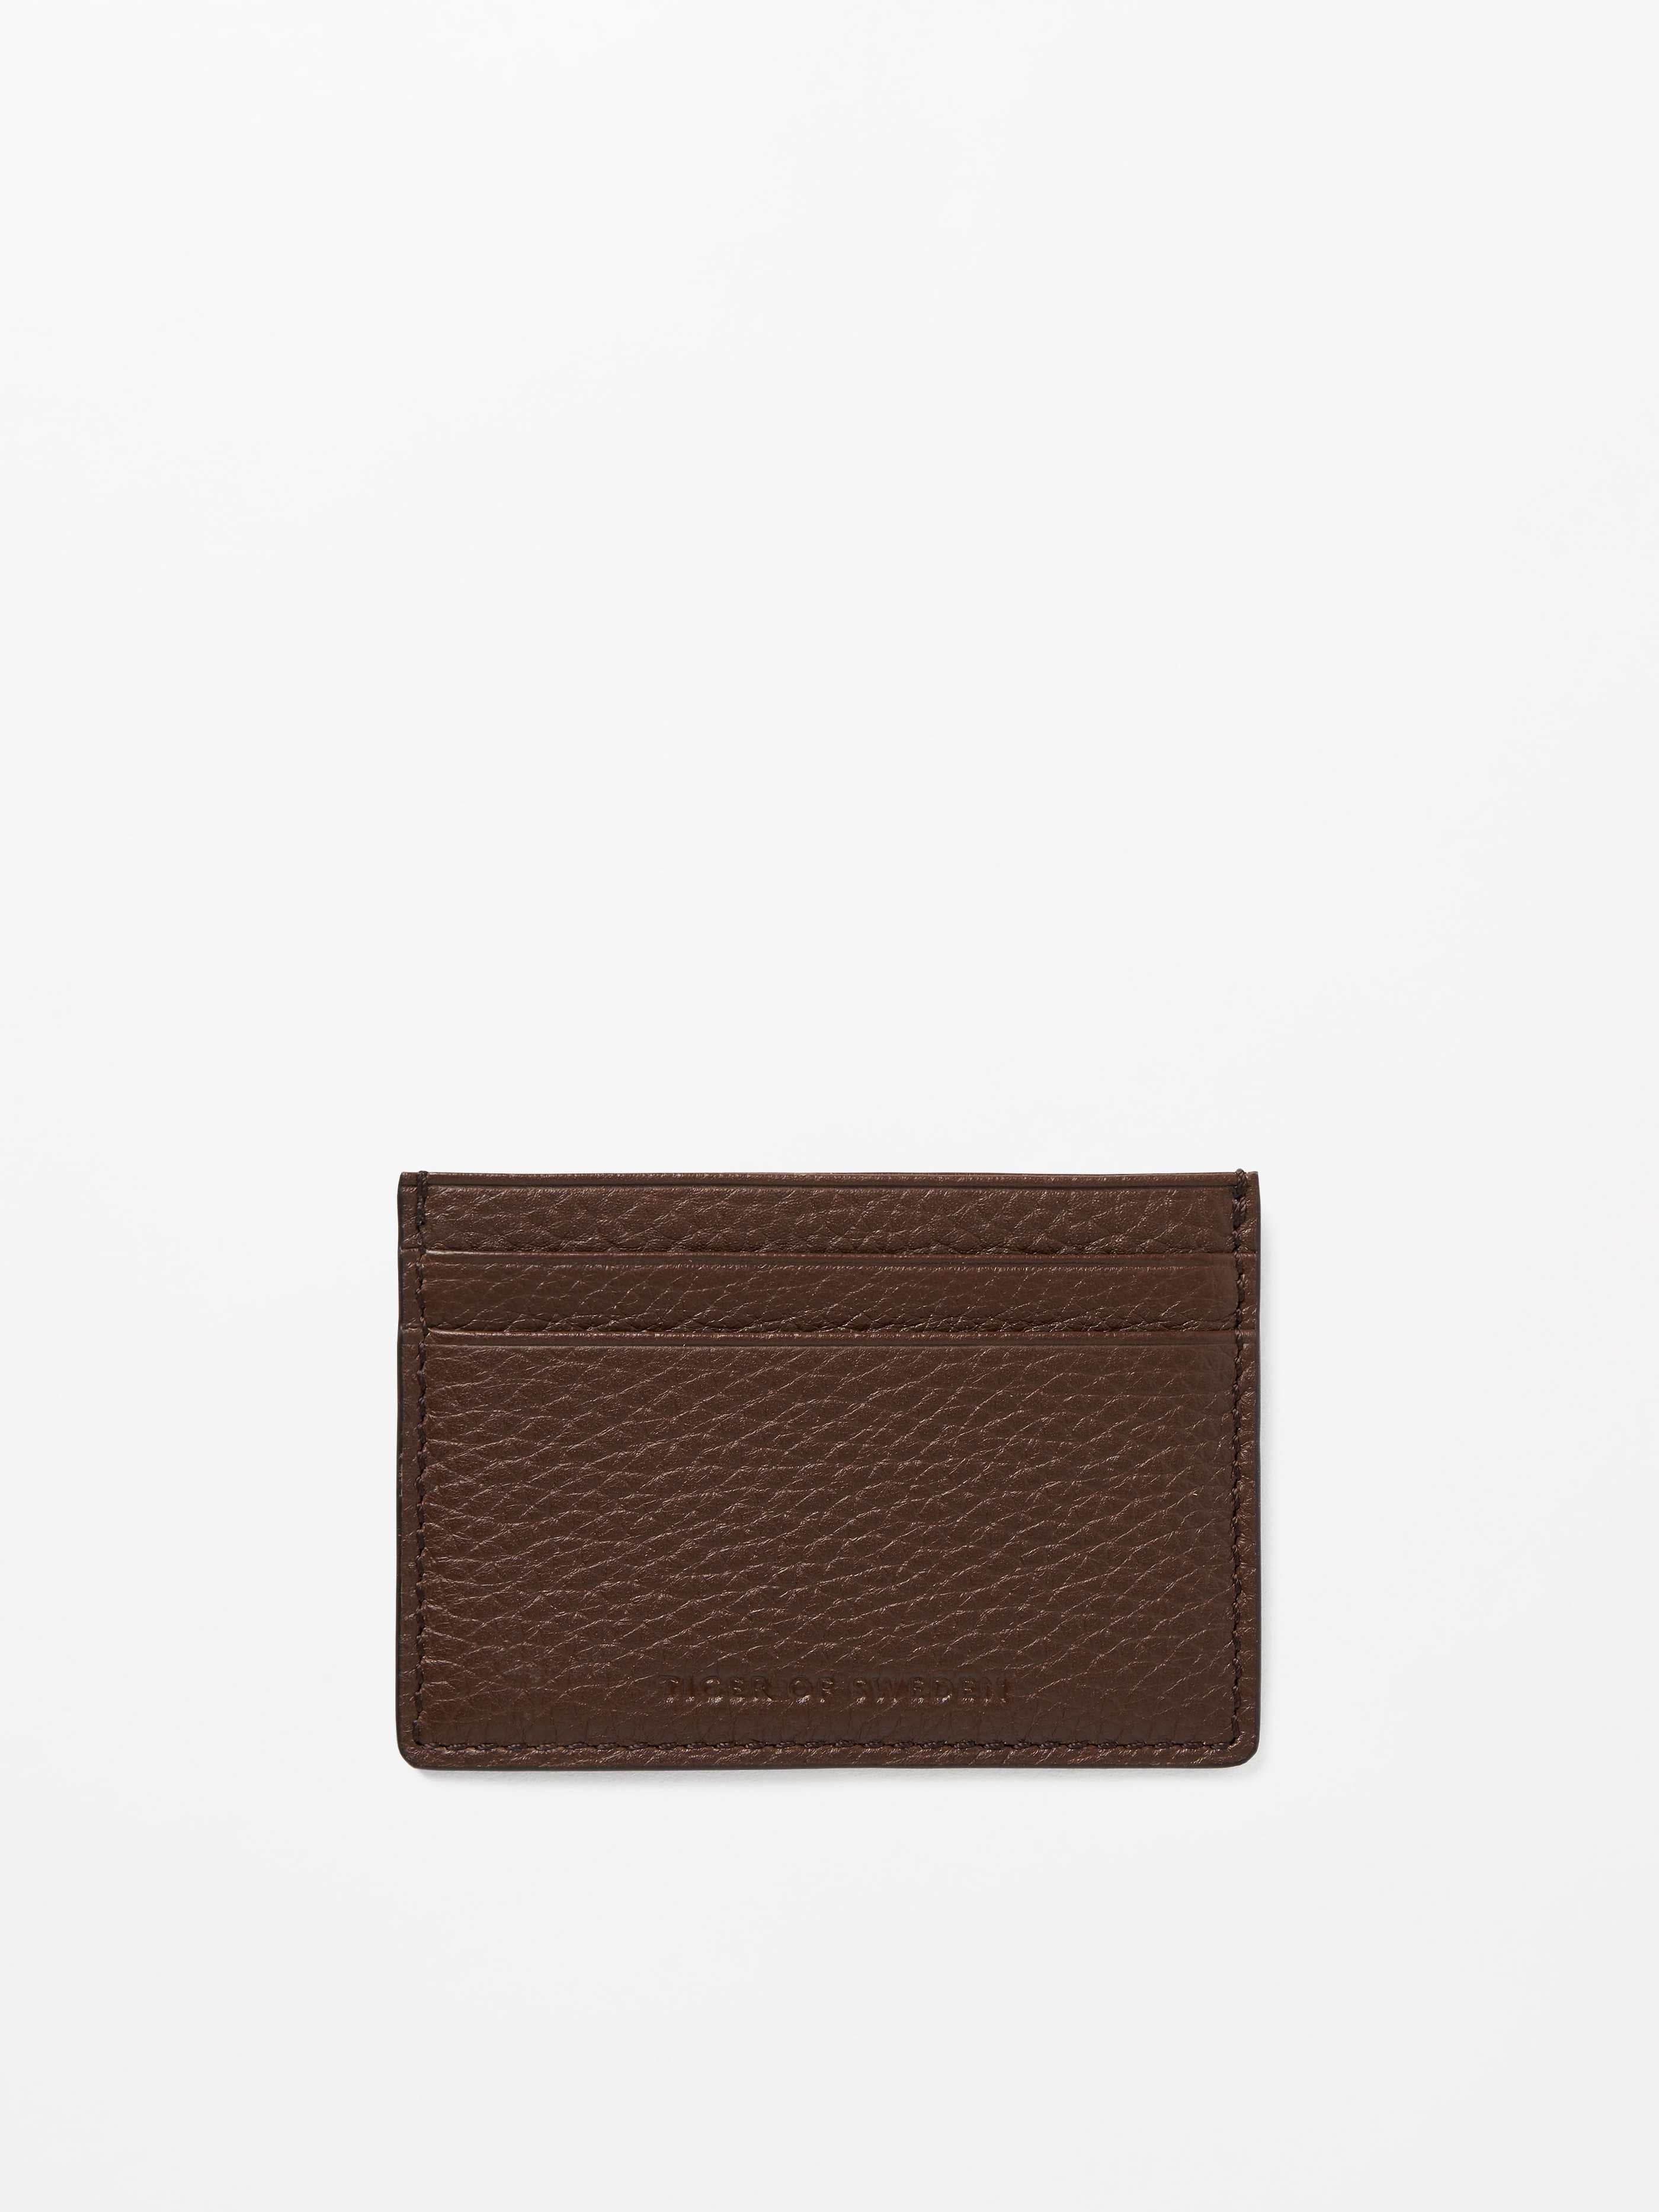 TIGER OF SWEDEN WAKE CARDHOLDER IN COGNAC U69380009Z 12S | Shop from eightywingold an official brand partner for TIGER OF SWEDEN CANADA & US